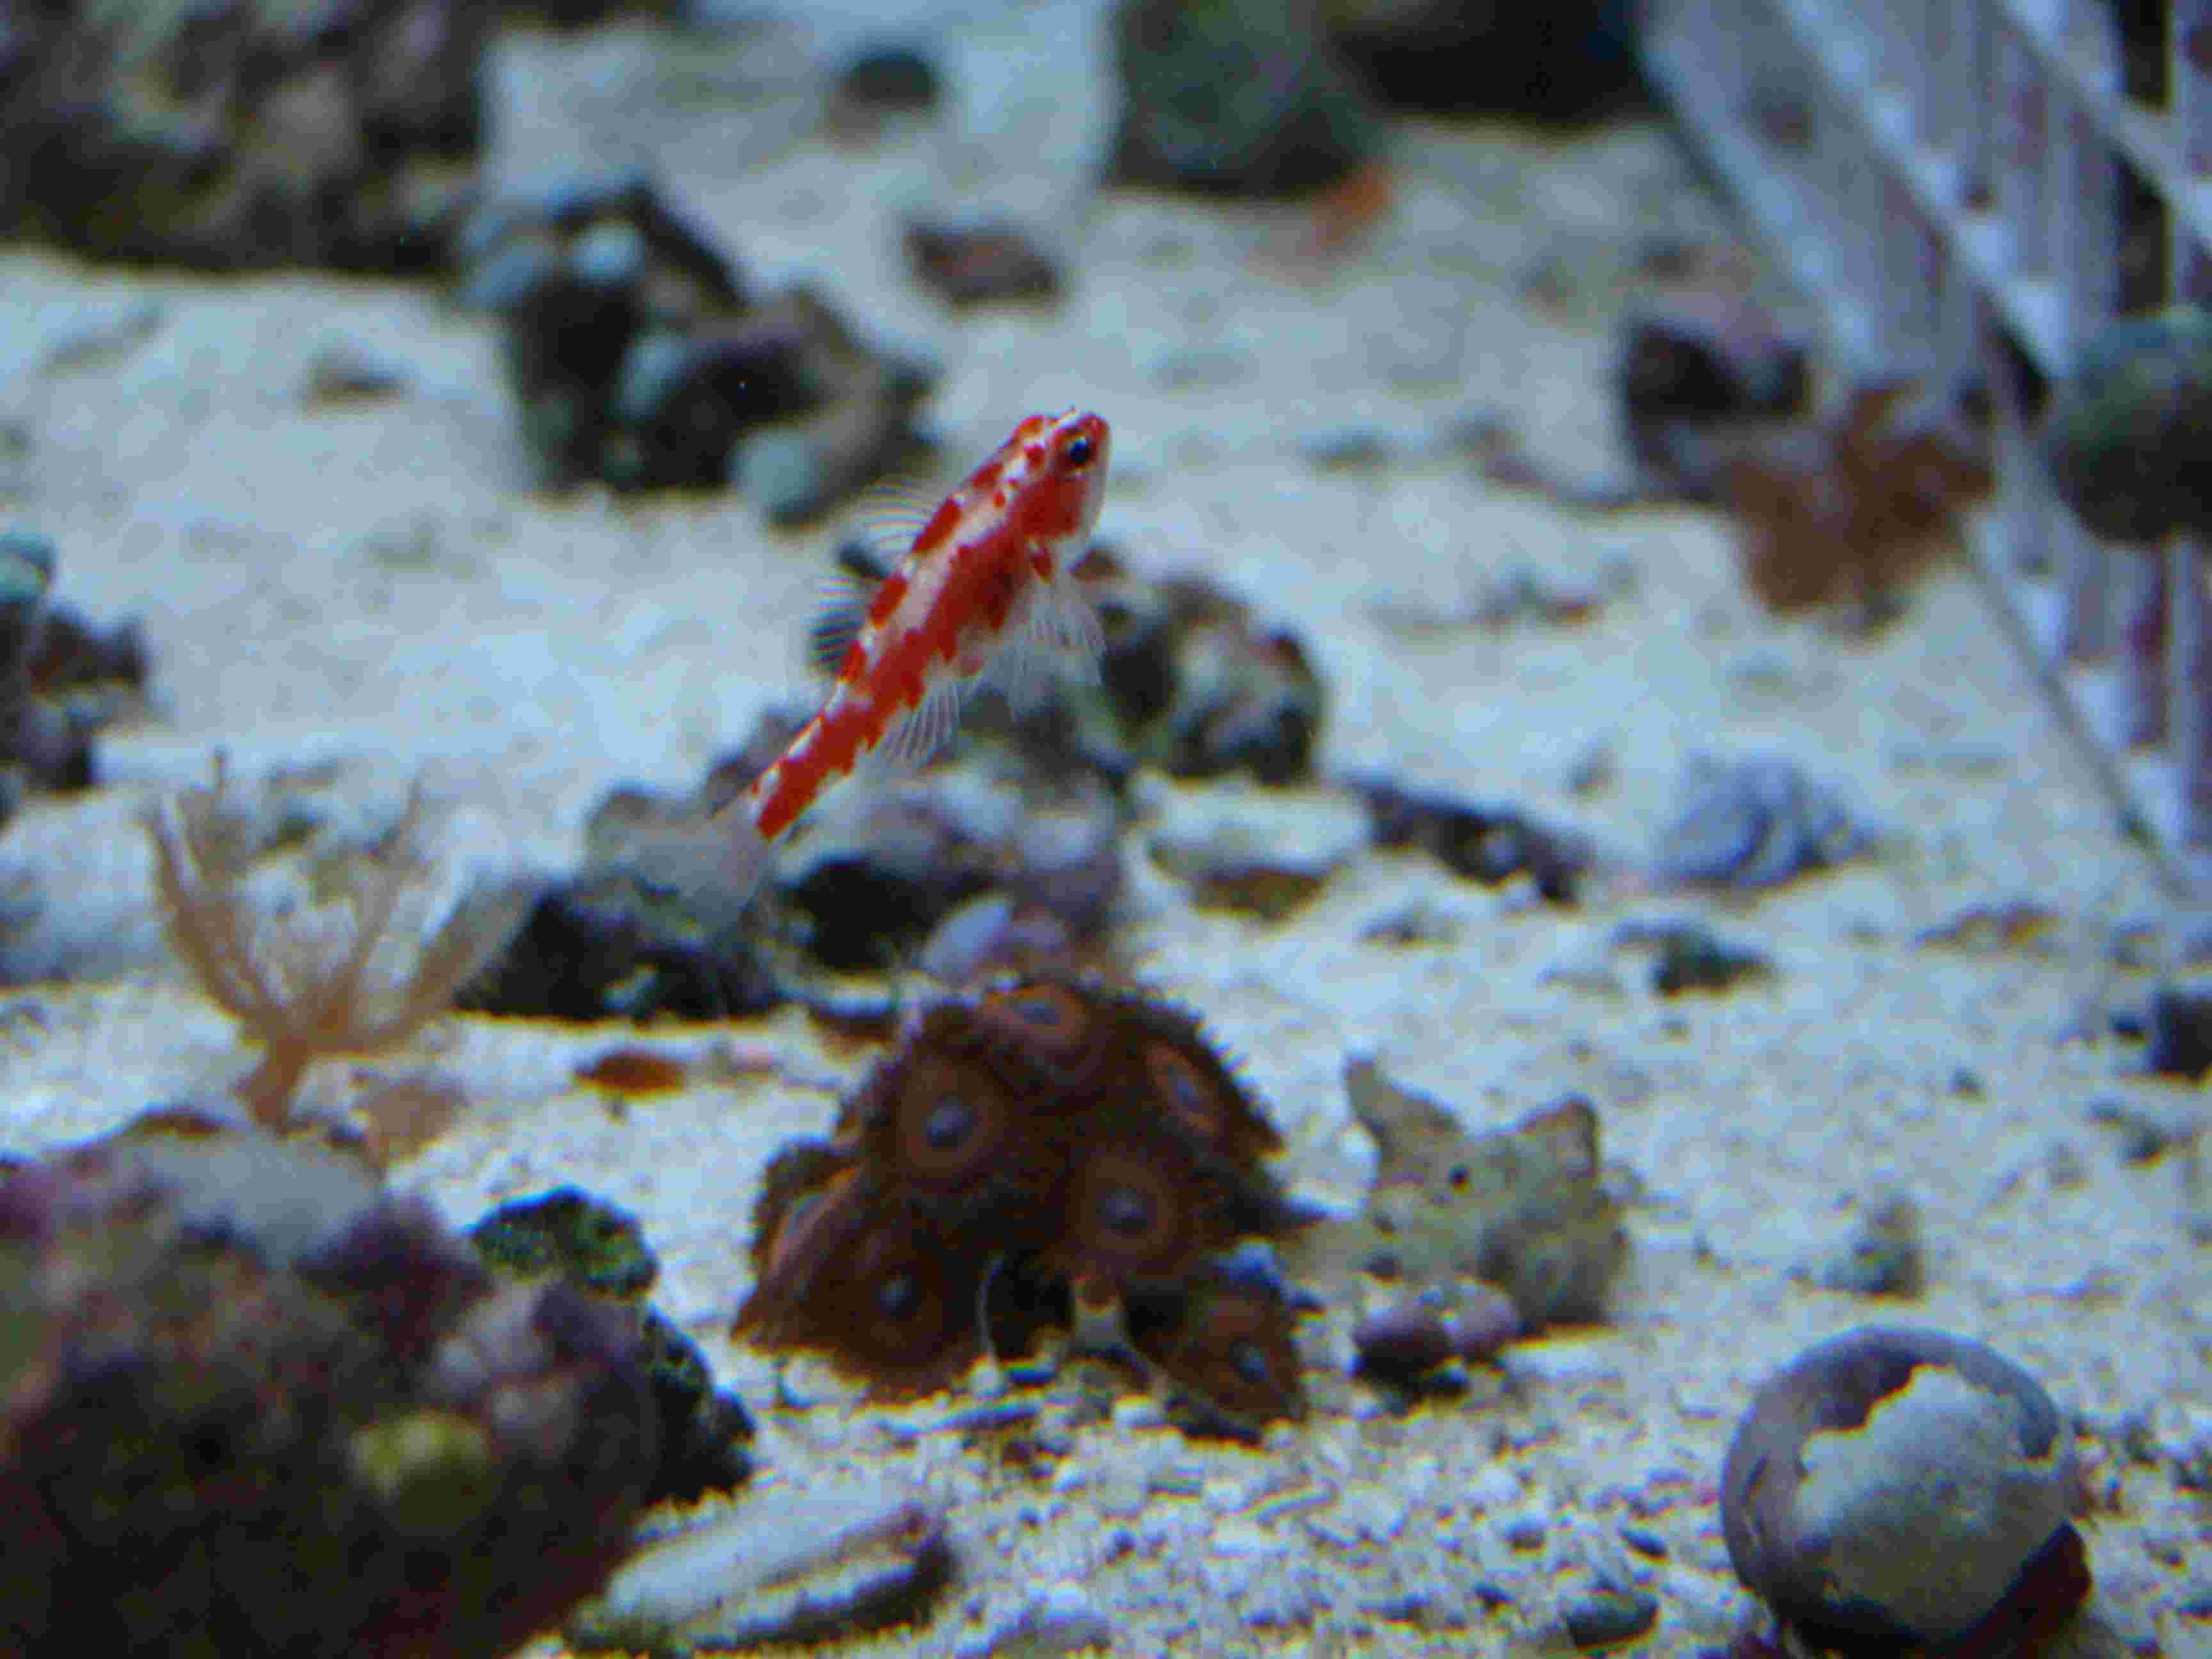  Trimma rubromaculatus (Red Jewel Goby, Red Spotted Dwarf Goby)